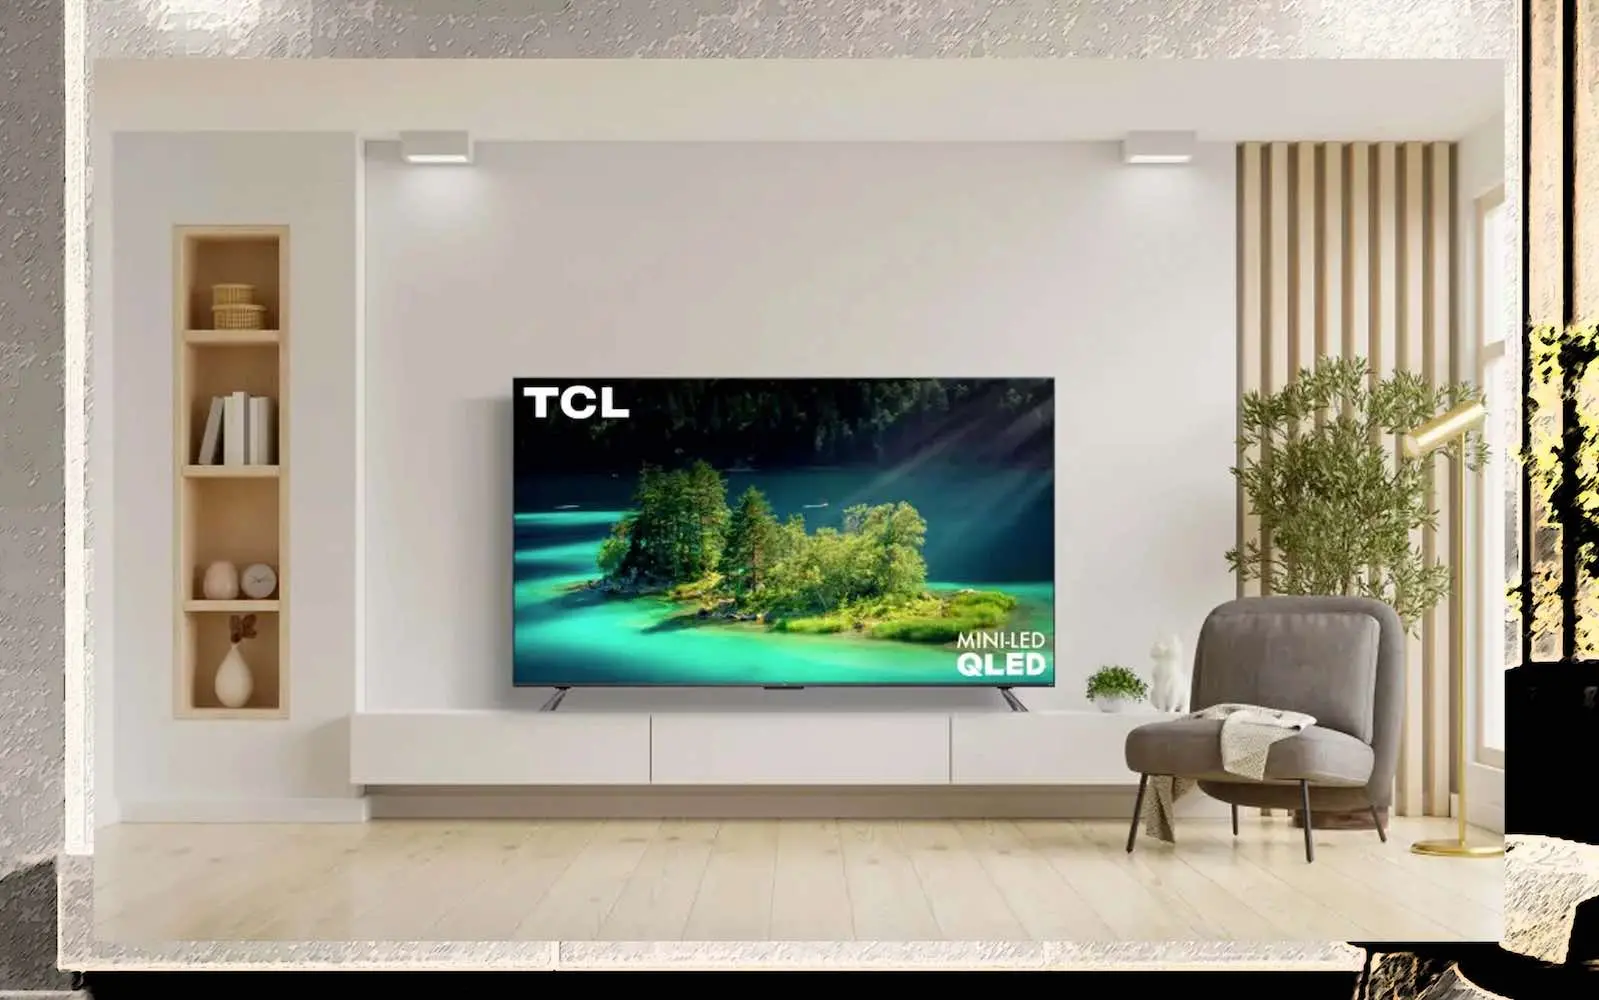 TCL large screen